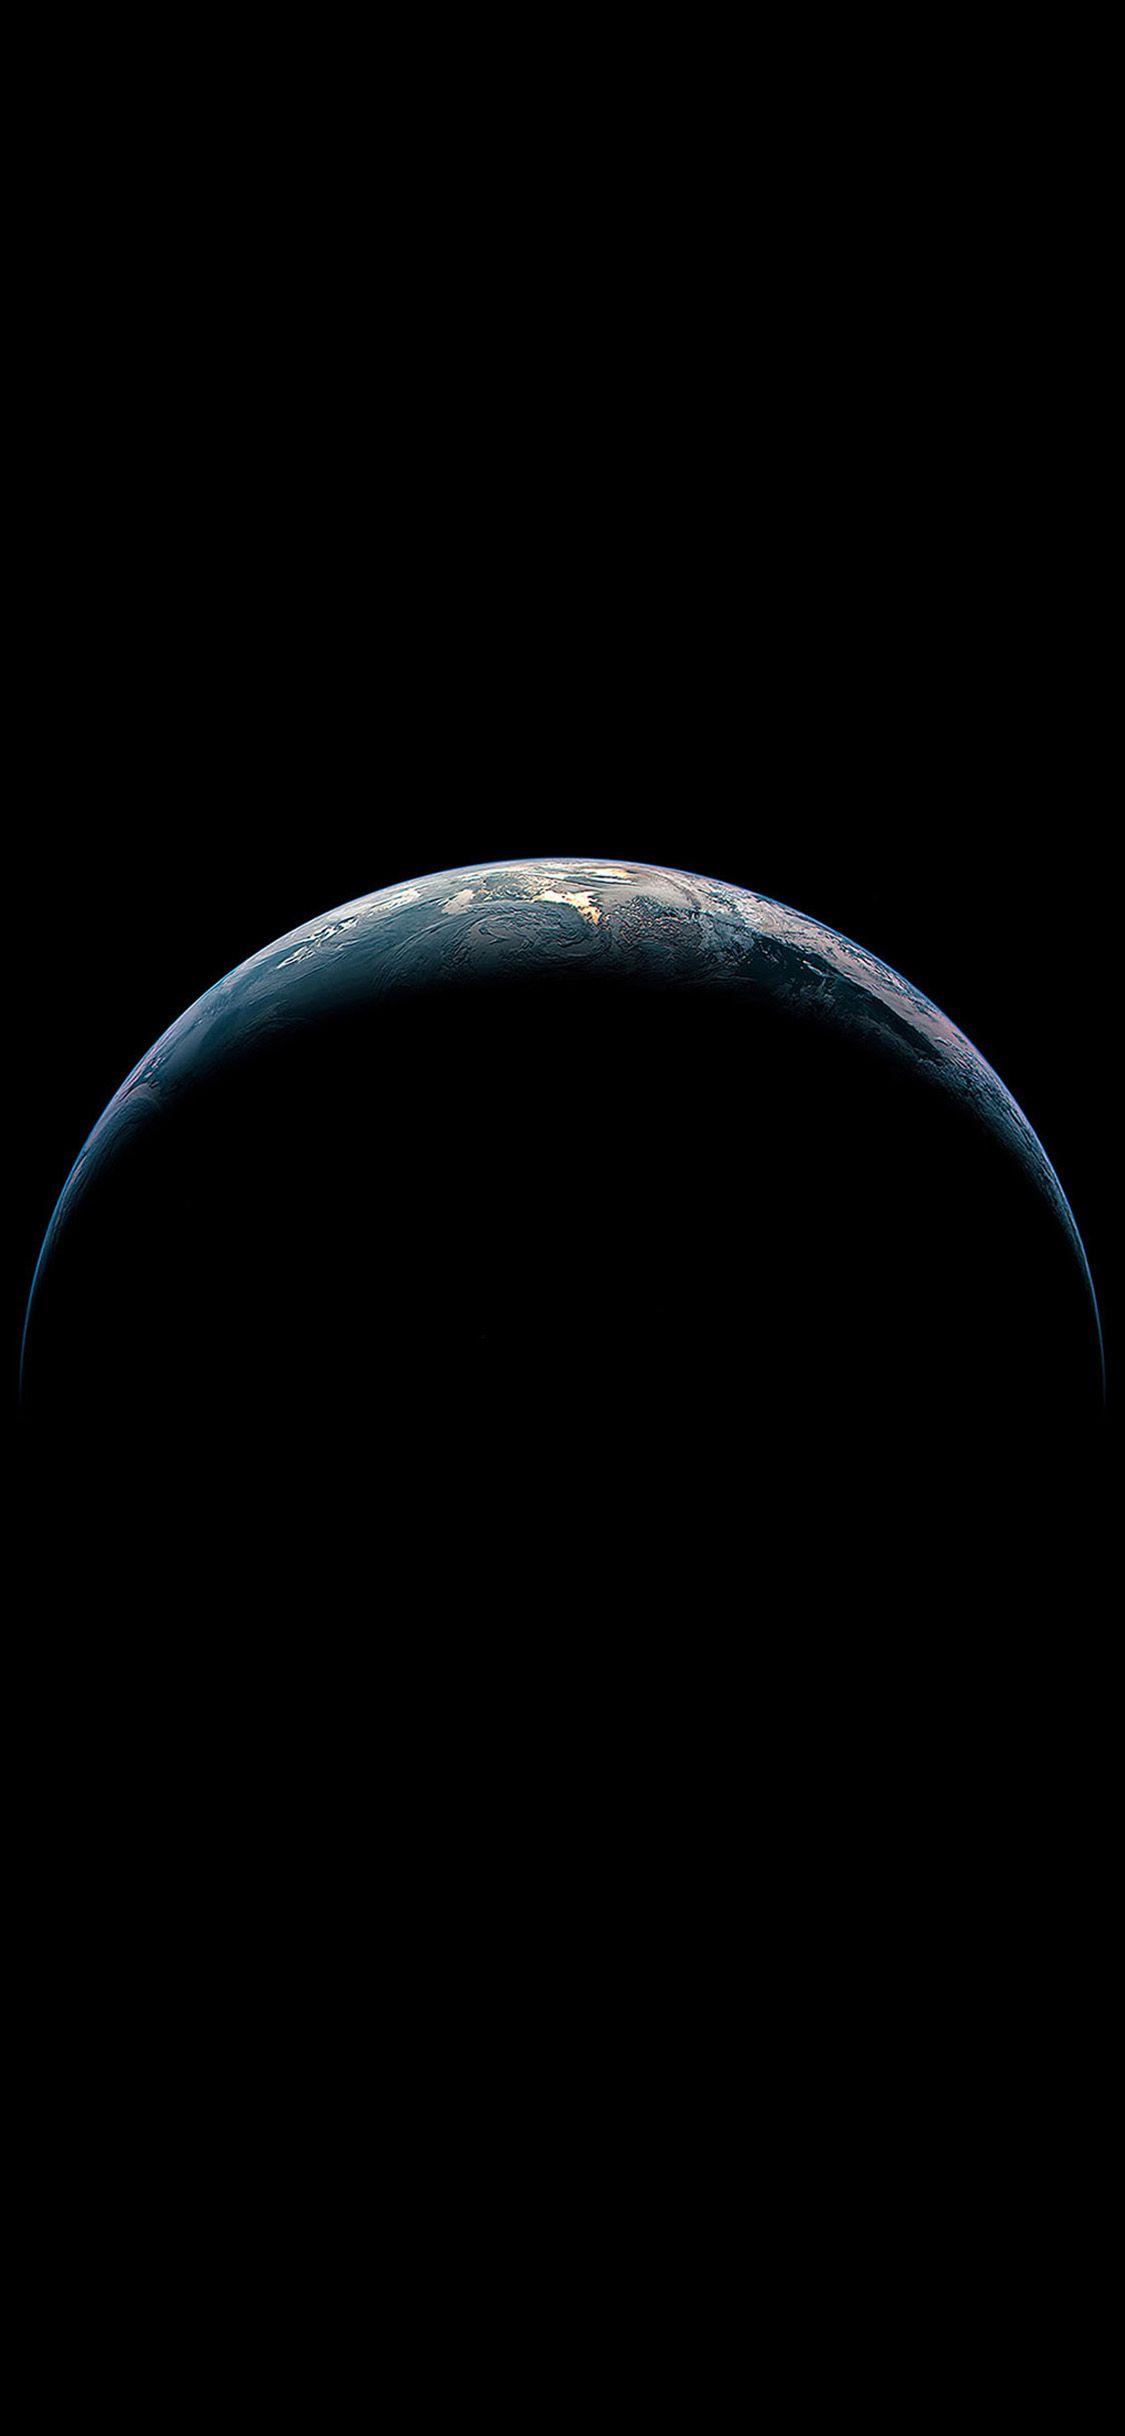 Iphone Xs Max Earth Wallpapers Wallpaper Cave